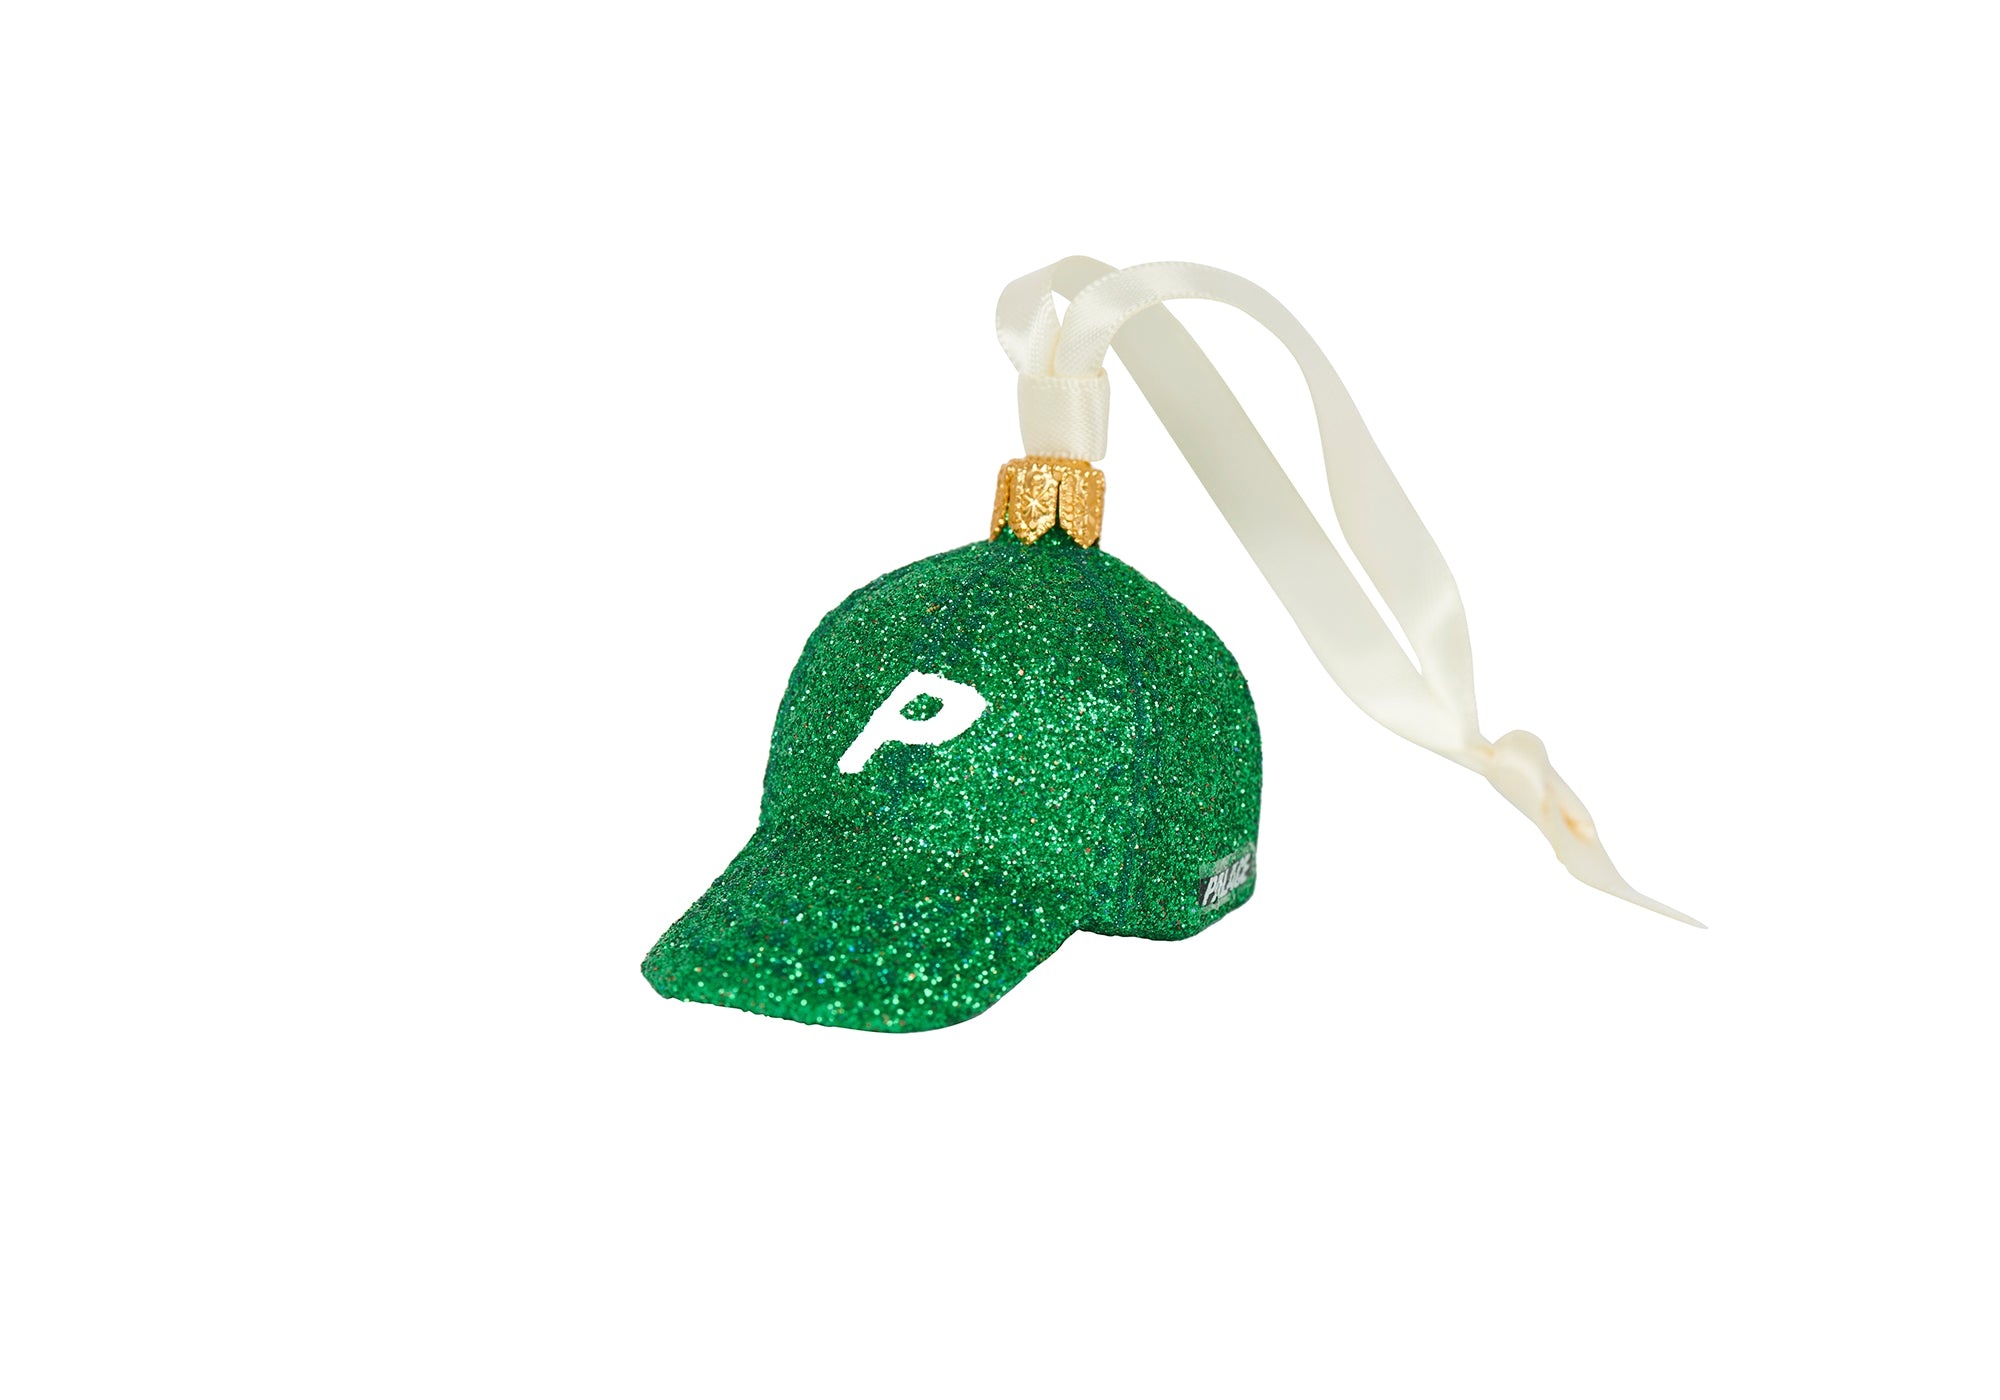 P 6-PANEL BAUBLE GREEN - 1